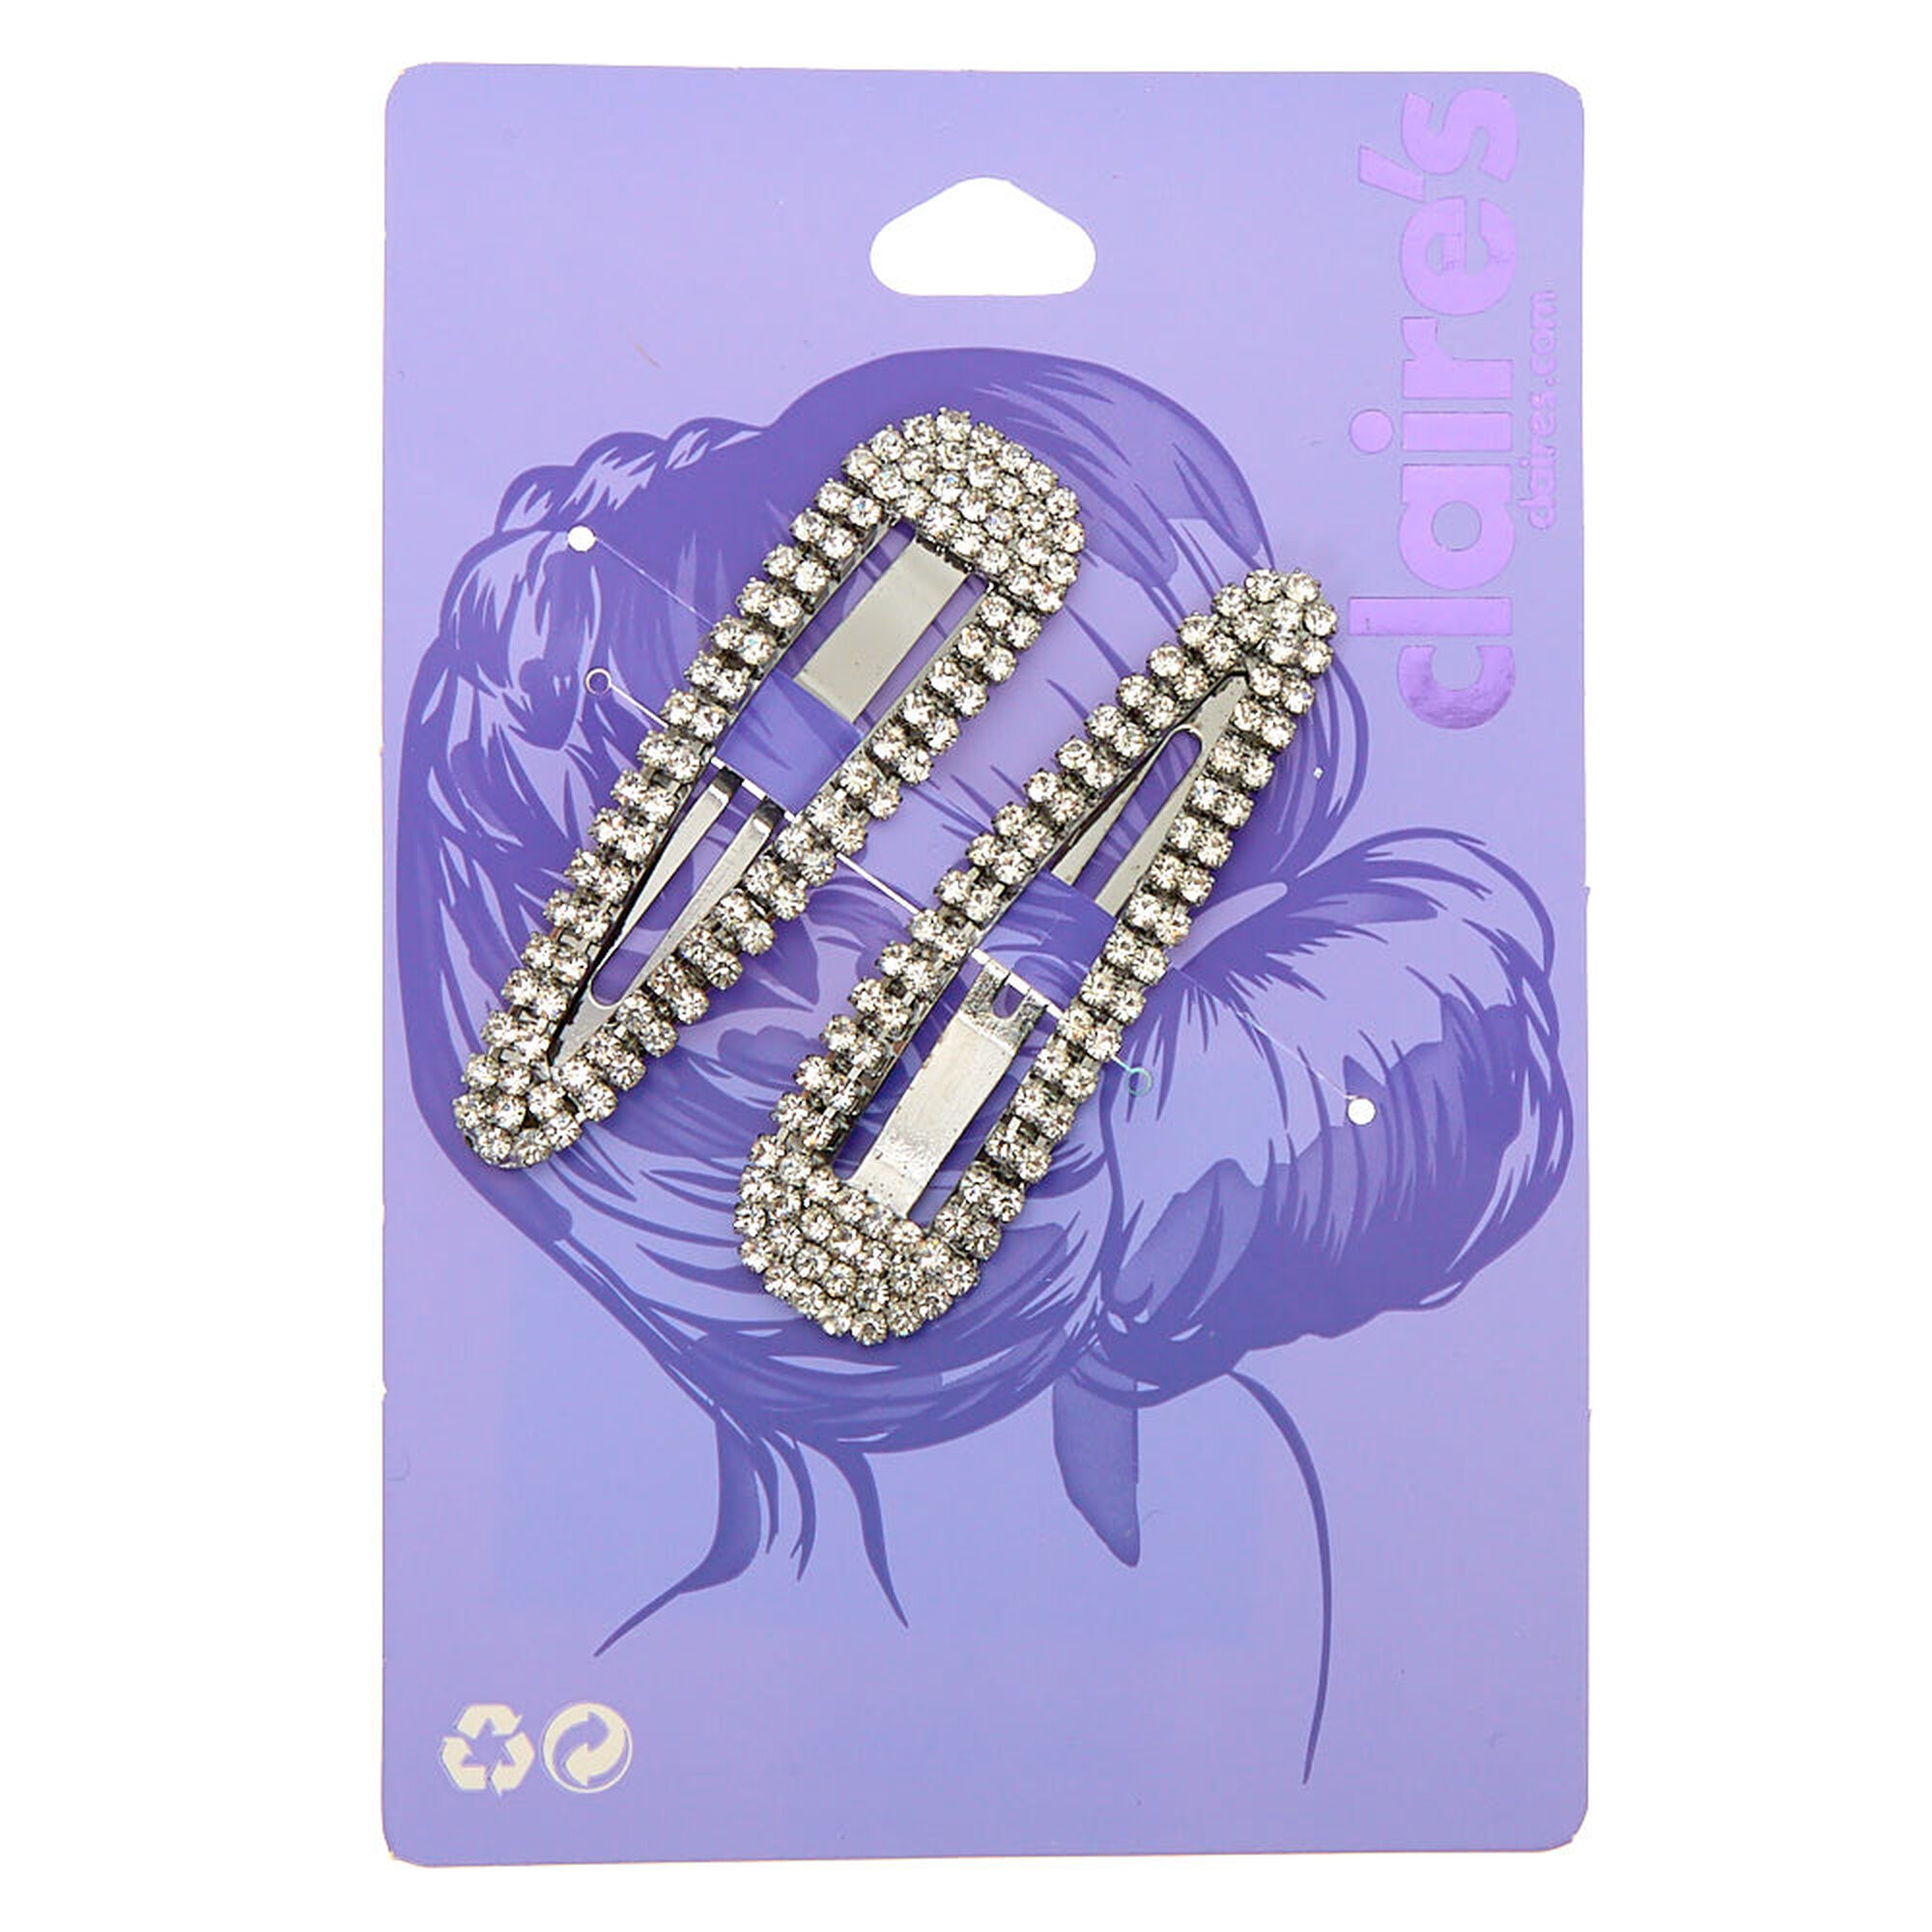 View Claires Hematite Rhinestone Snap Clips 2 Pack information